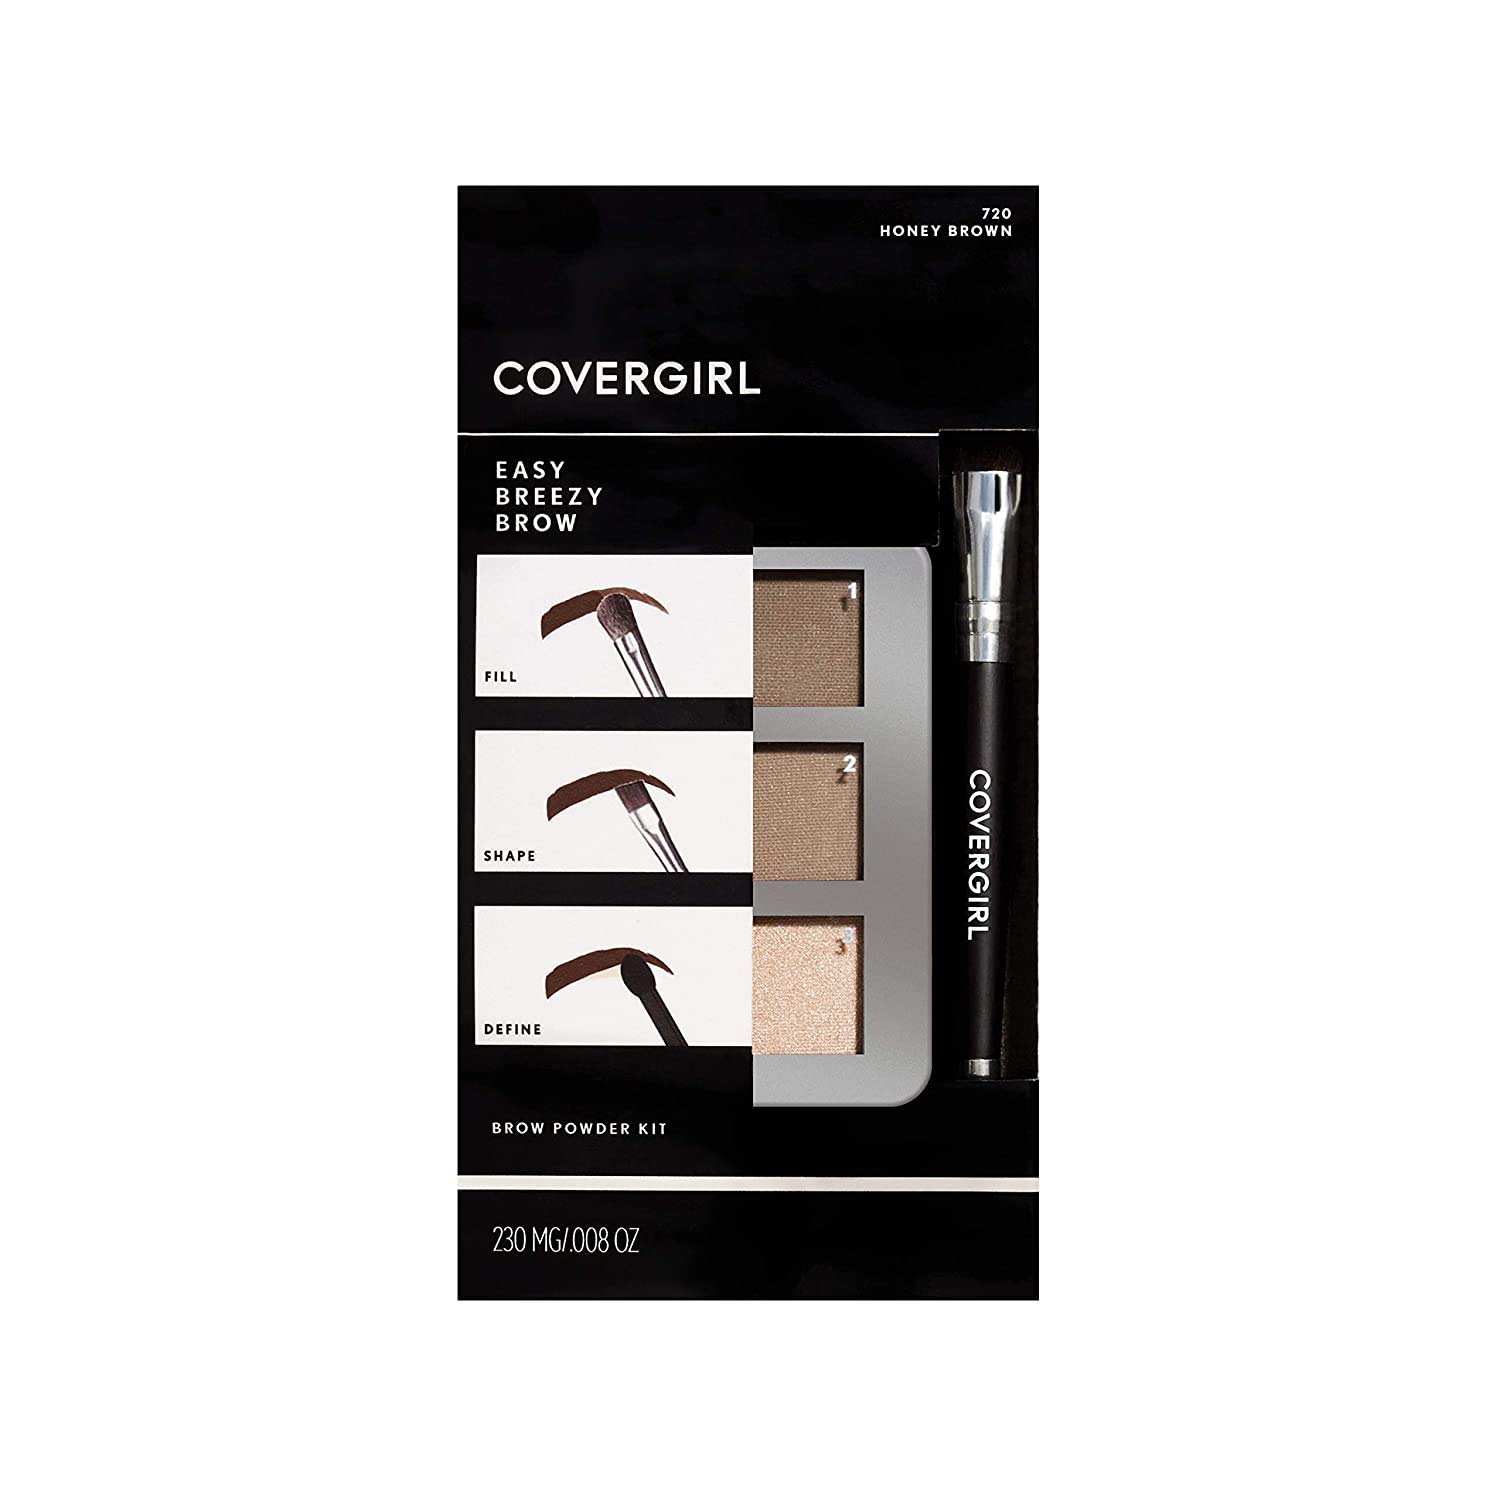 COVERGIRL Easy Breezy Brow Powder Kit, Soft Blonde, 1 count (packaging may vary), Eyebrow Powder, Eyebrow Kit, Eyebrow Powder Kit, Eyebrows, Includes Double-Ended Fluffy and Angeled Brush